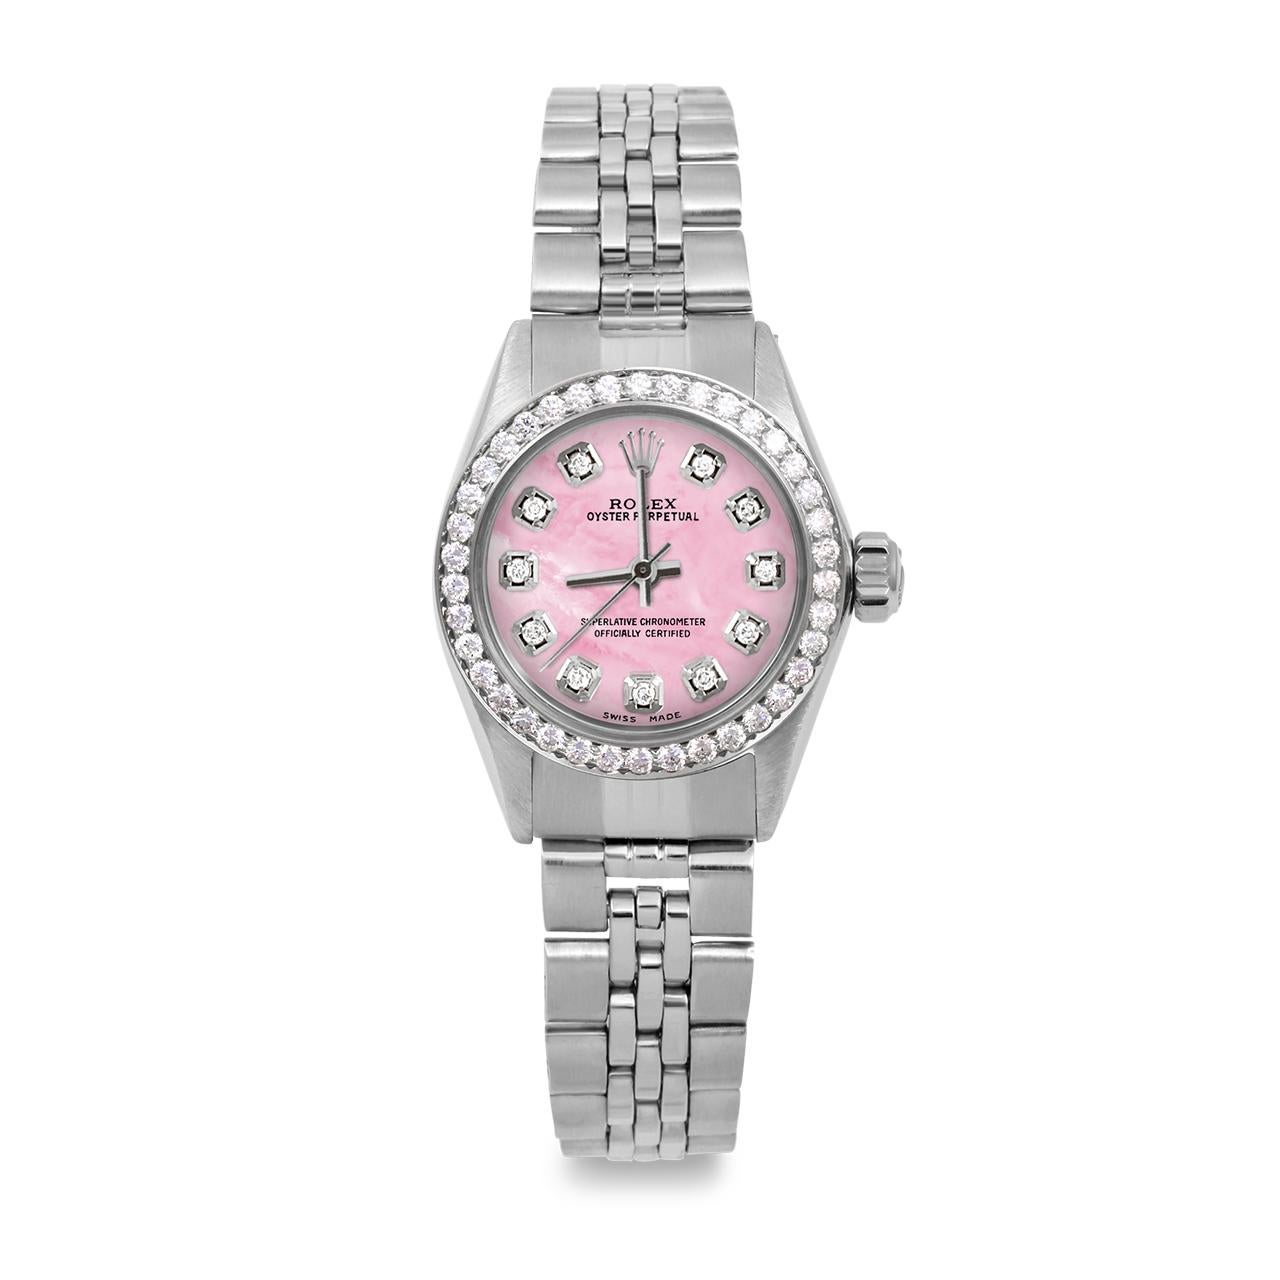 Brand : Rolex
Model : Oyster Perpetual Model
Gender : Ladies
Metals : Stainless Steel
Case Size : 24 mm
Dial : Custom Pink Mother Of Pearl Diamond Dial (This dial is not original Rolex And has been added aftermarket yet is a beautiful Custom